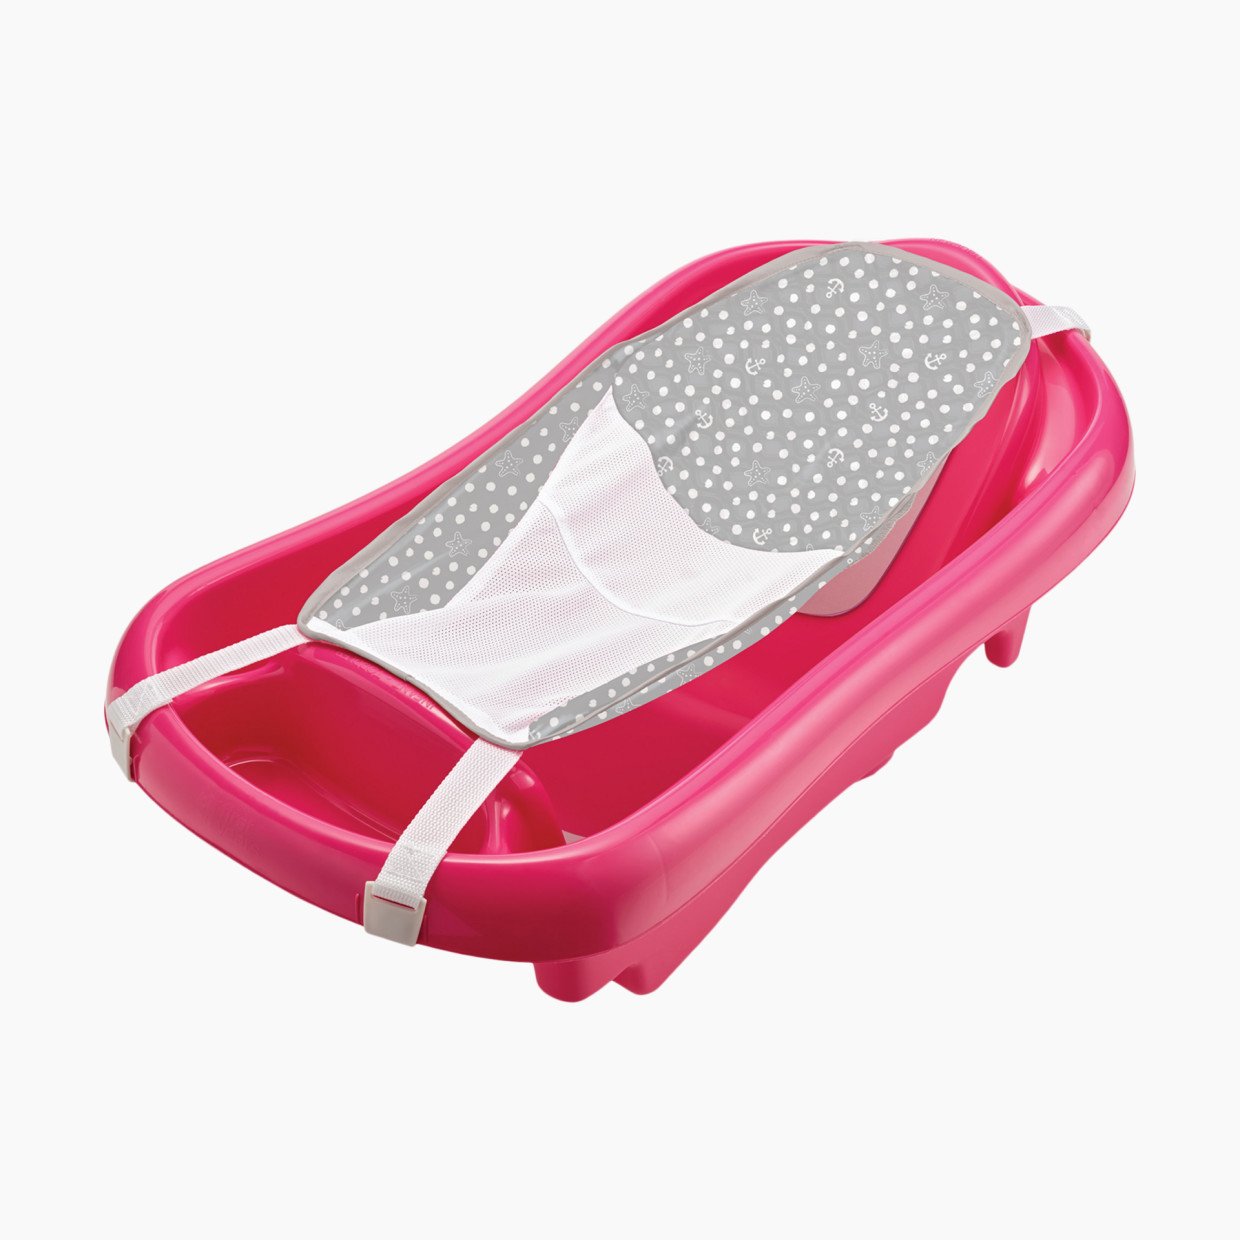 The First Years Sure Comfort Deluxe Newborn to Toddler Tub with Sling - Pink.